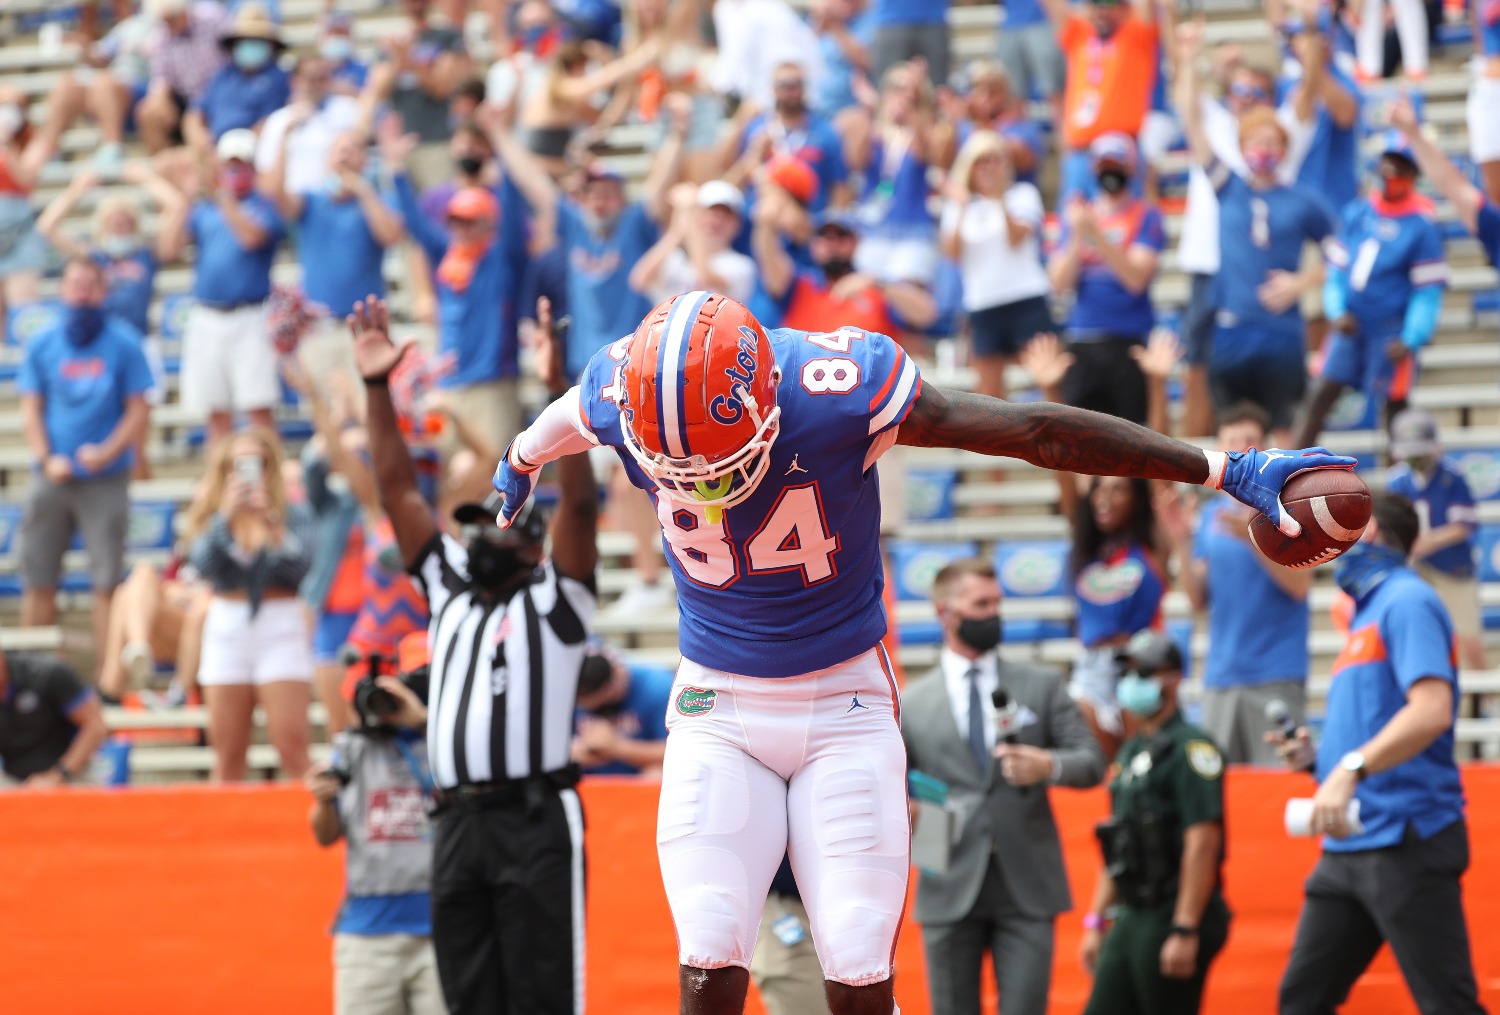 Florida TE Kyle Pitts just cemented his status as a top-10 NFL draft prospect and legitimate Heisman Trophy candidate with another dominant performance.